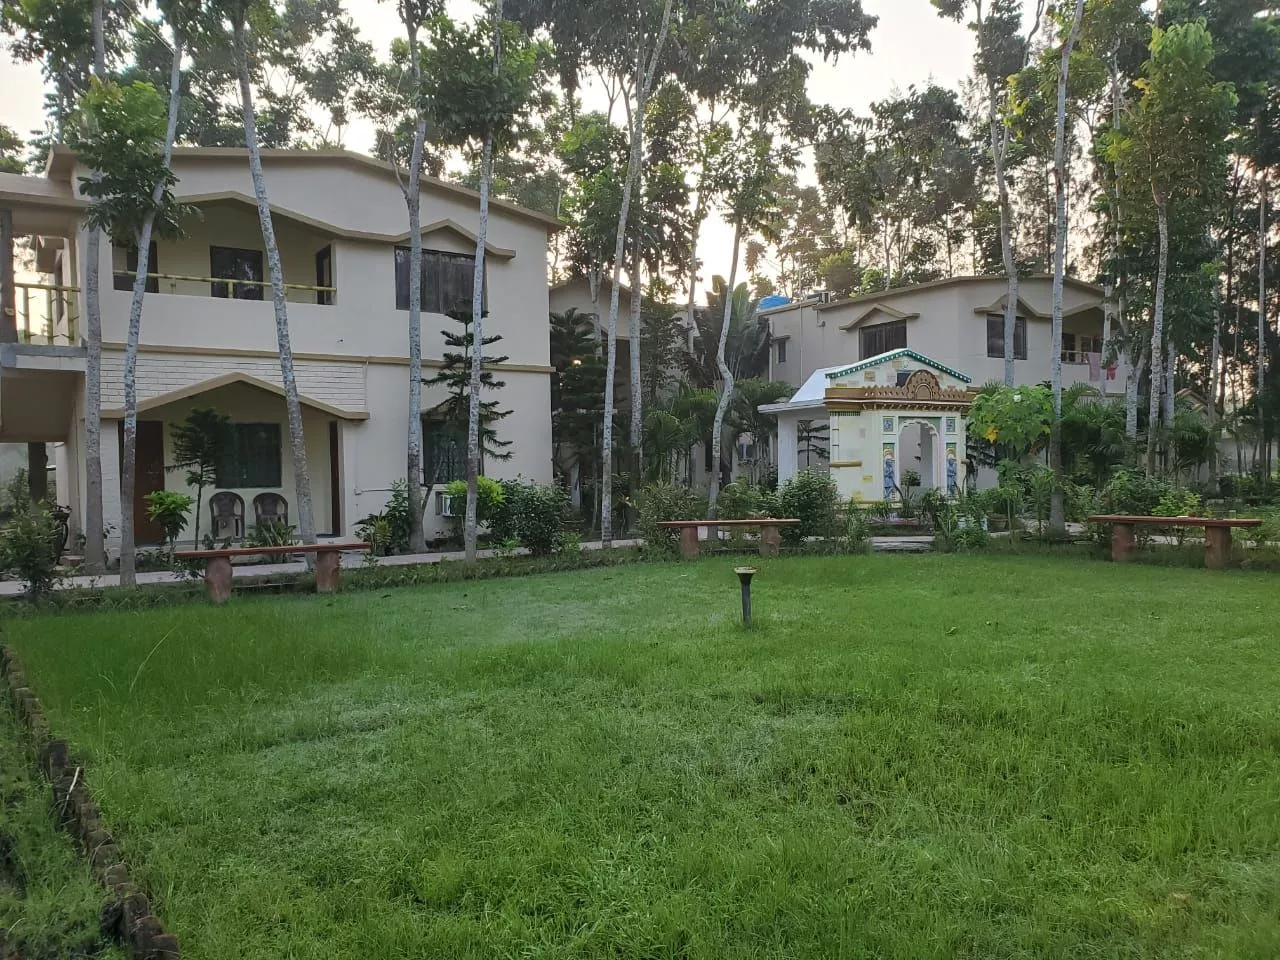 Lawn of our Resort